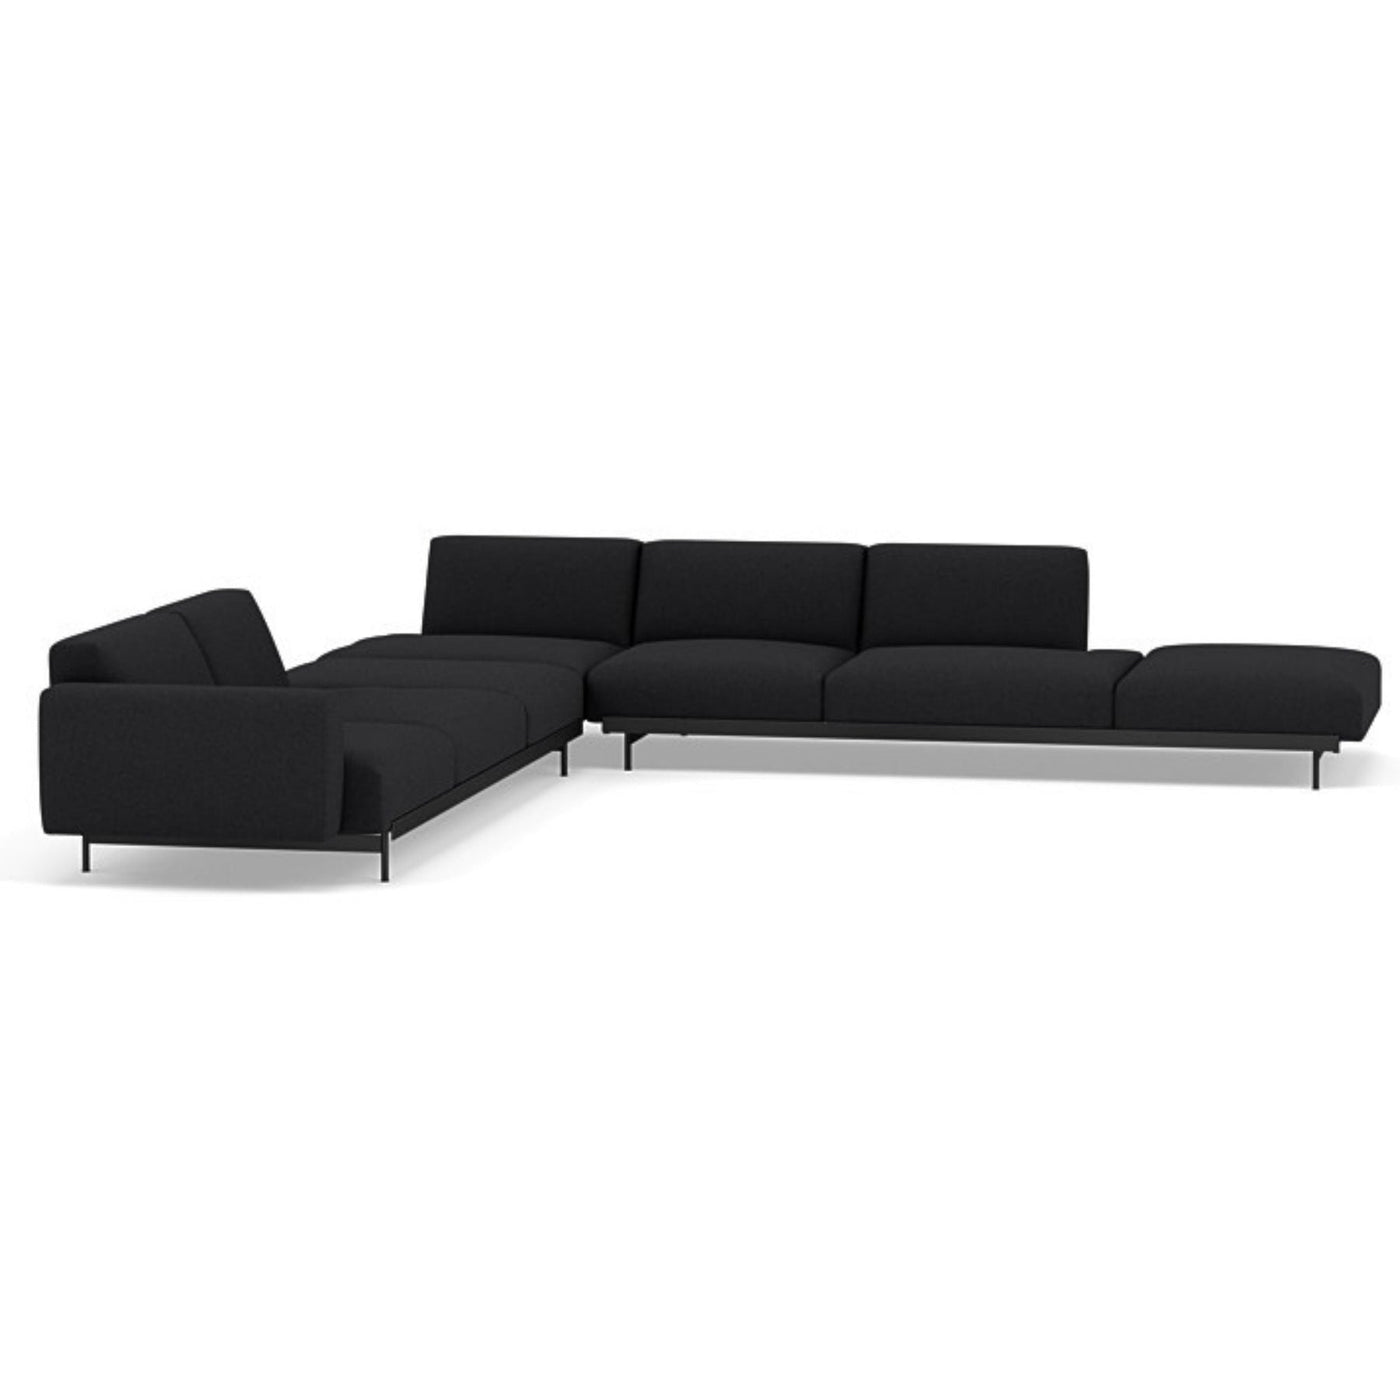 Muuto In Situ corner sofa, configuration 9. Made to order from someday designs. #colour_divina-md-193